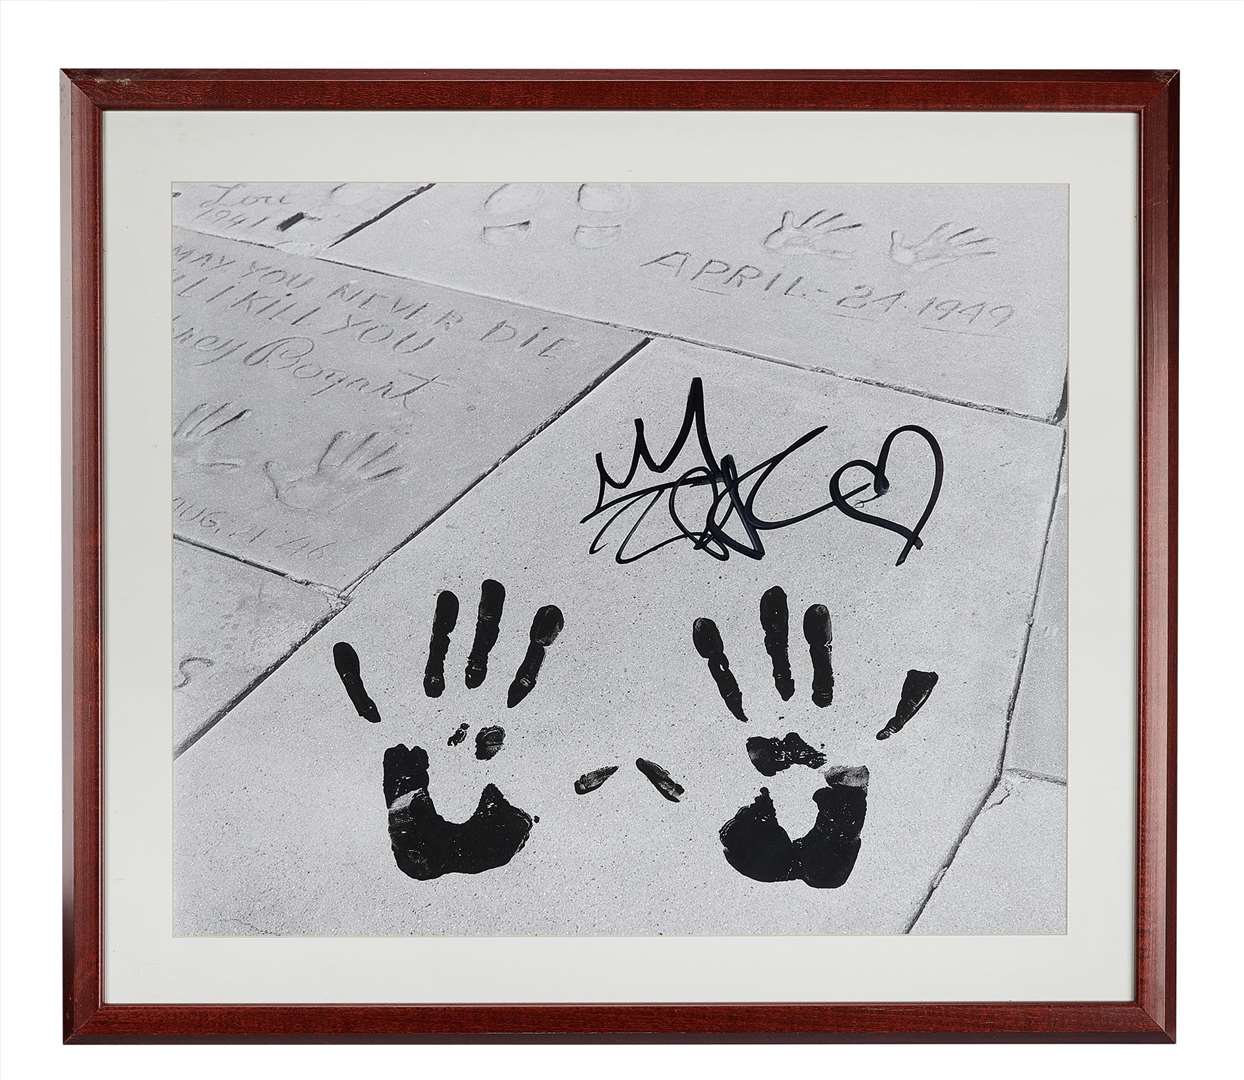 Other items to be auctioned include a framed large-format black and white photo print with rap legend Shakur’s hand print (Julien’s Auctions/PA)